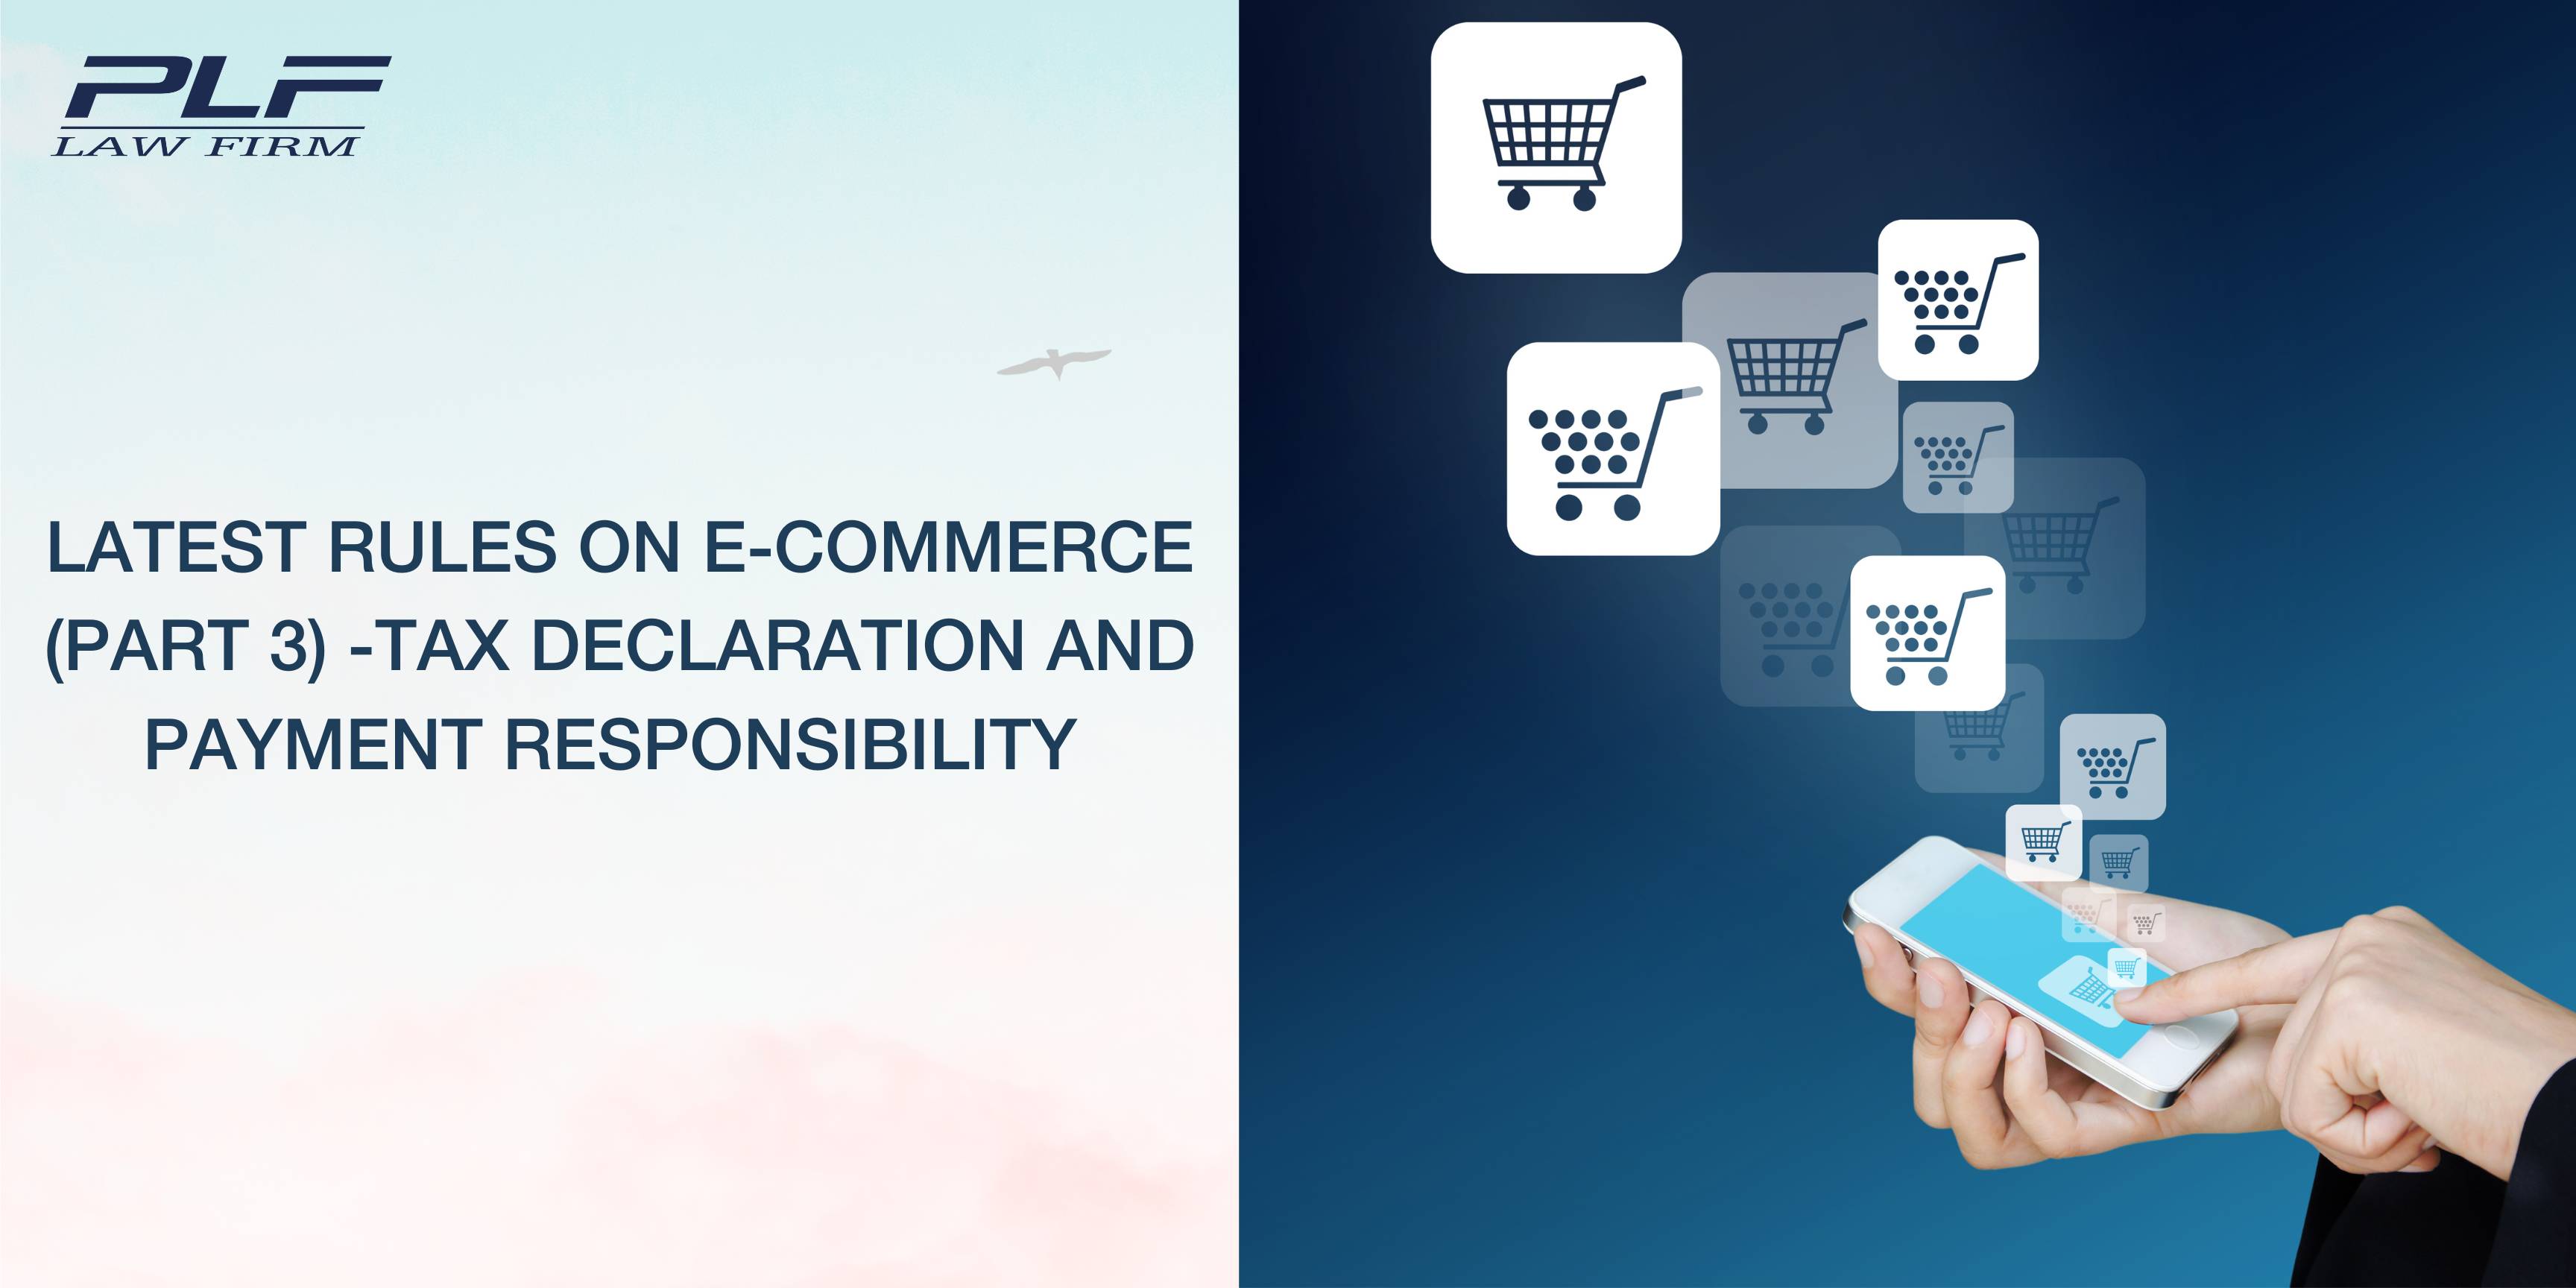 Plf Latest Rules On E Commerce Tax Declaration And Payment Responsibility Part